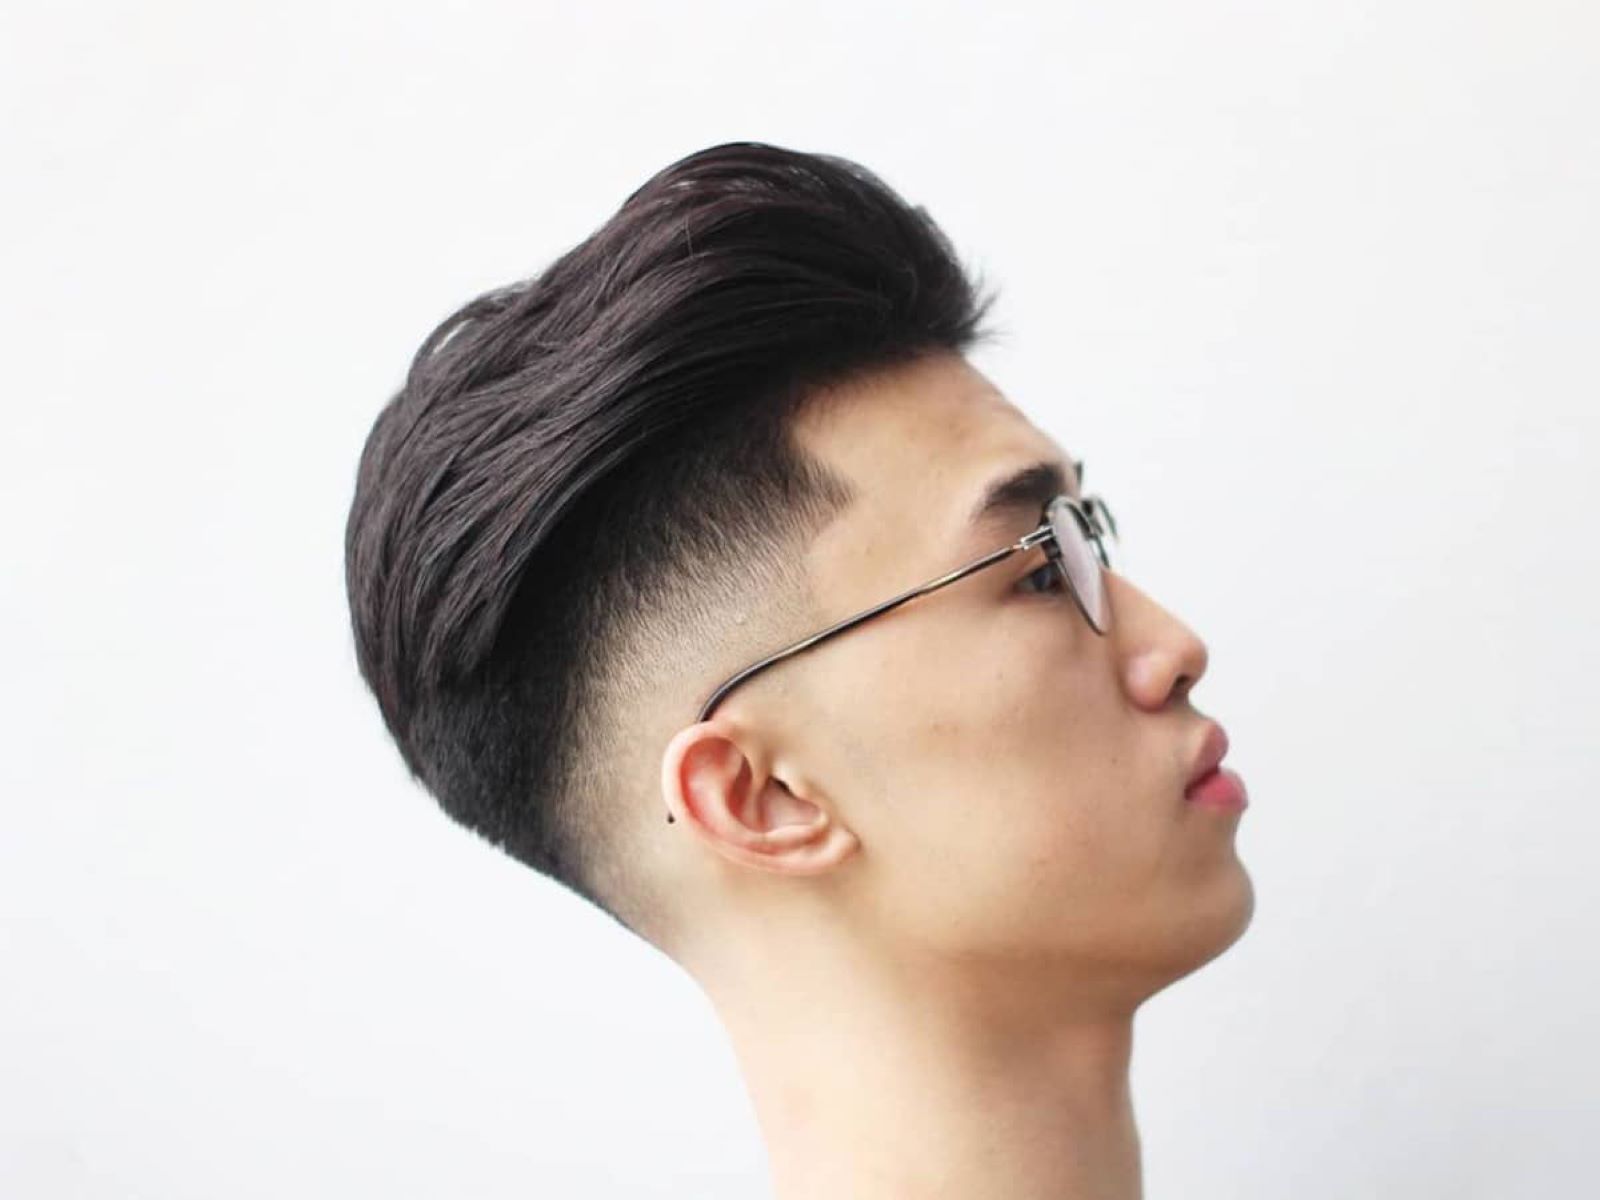 The Ultimate Guide To Getting A Fade Haircut